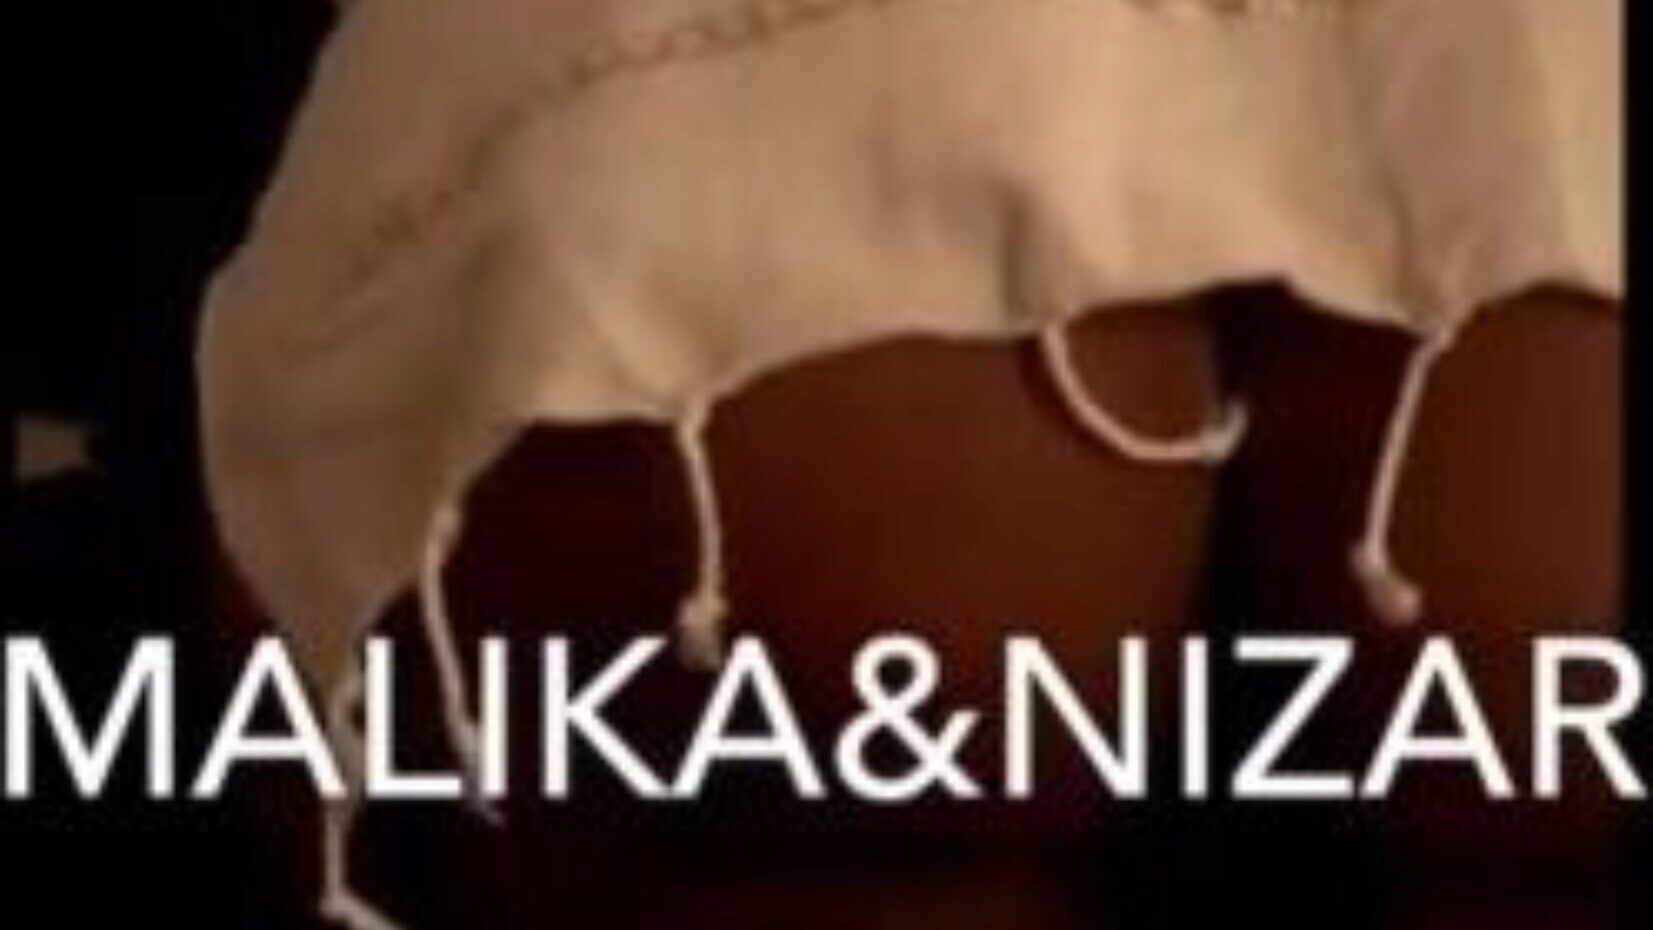 Malika &nizar: Free Sexy Hardcore Porn Video d3 - xHamster Watch Malika &nizar tube orgy episode for free-for-all on xHamster, with the authoritative bevy of Tunisian Arab & Sexy Hardcore pornography video scenes